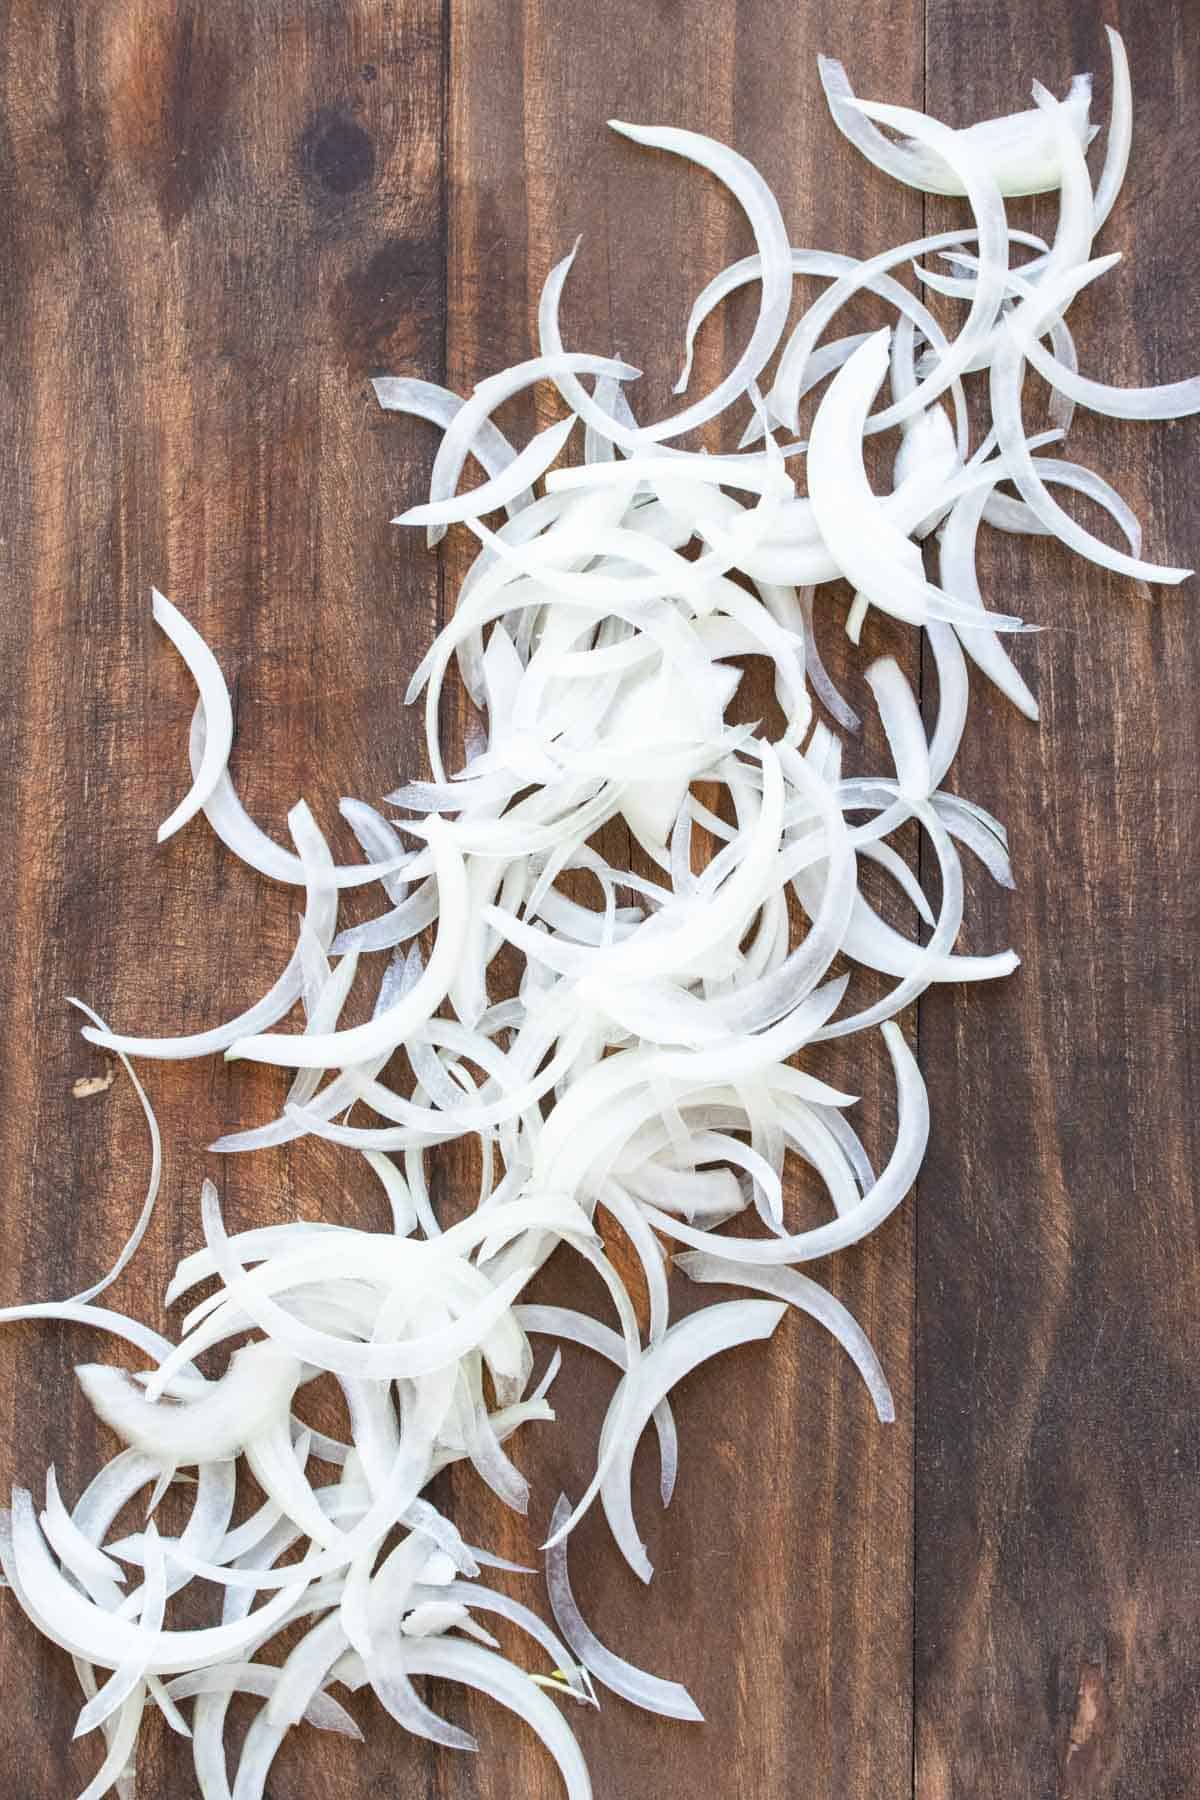 Sliced onions on a wooden surface